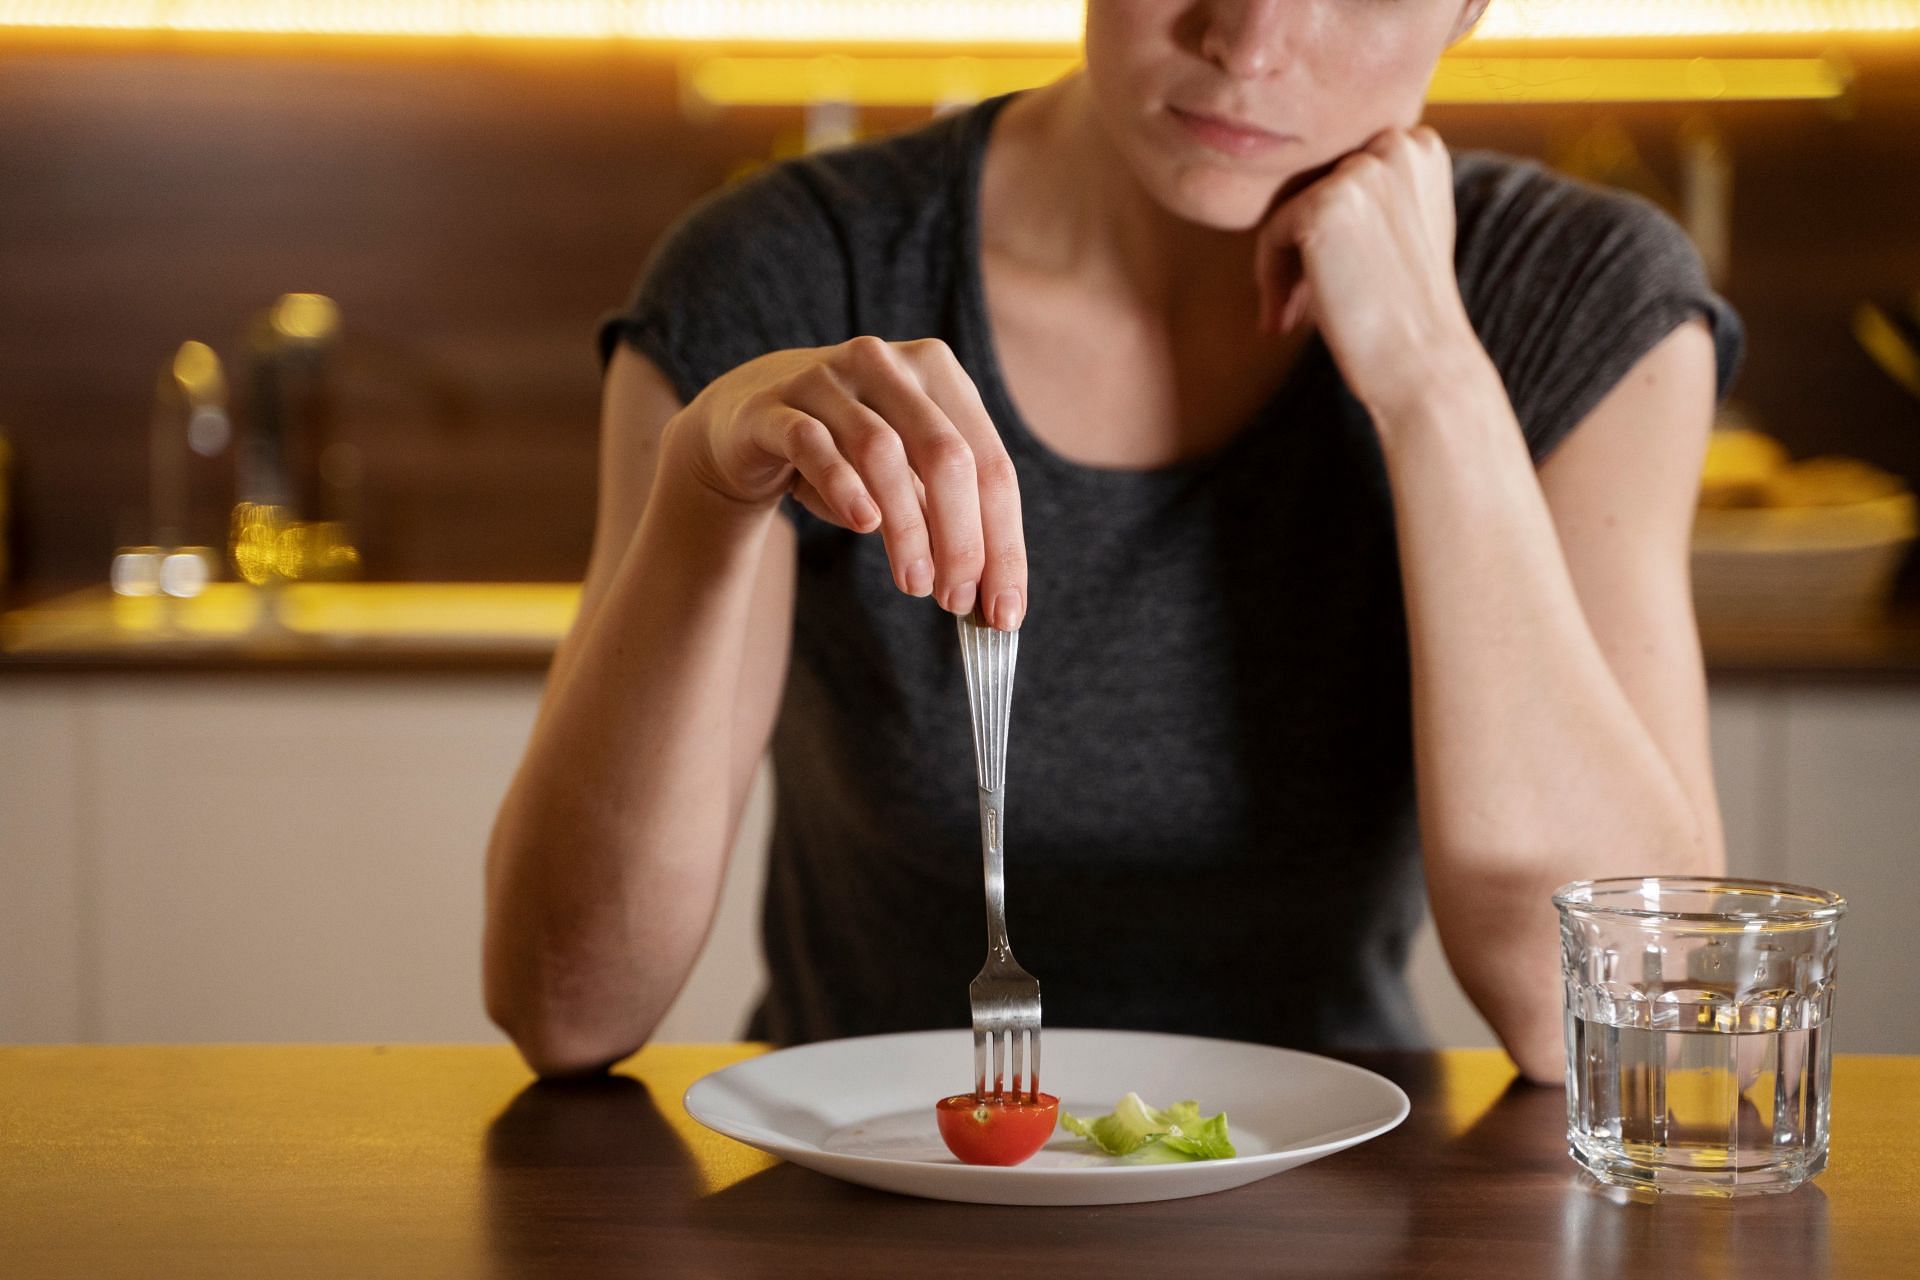 What Is Anorexia Nervosa? Symptoms, Causes and Prevention